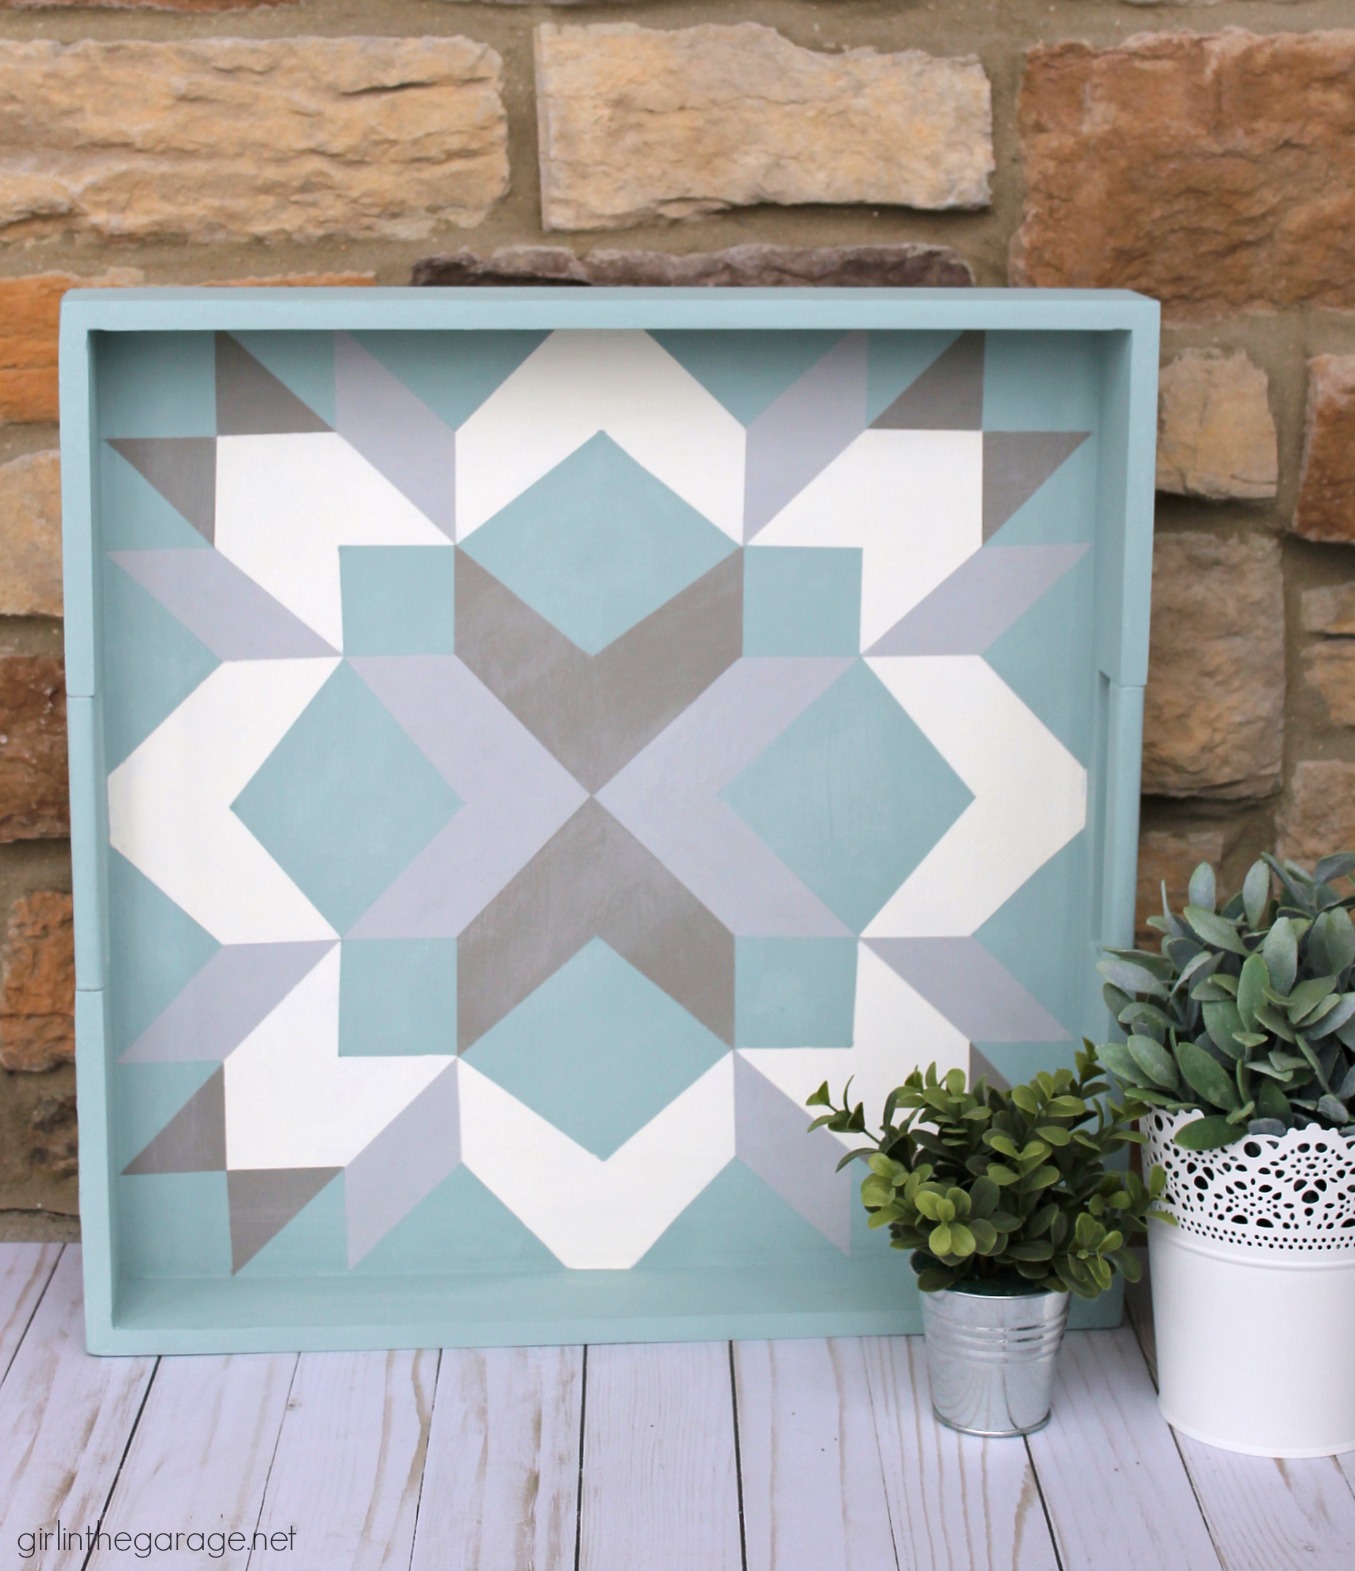 How to paint a barn quilt on a thrifted tray for a beautiful art piece. Step by step DIY tutorial by Girl in the Garage.